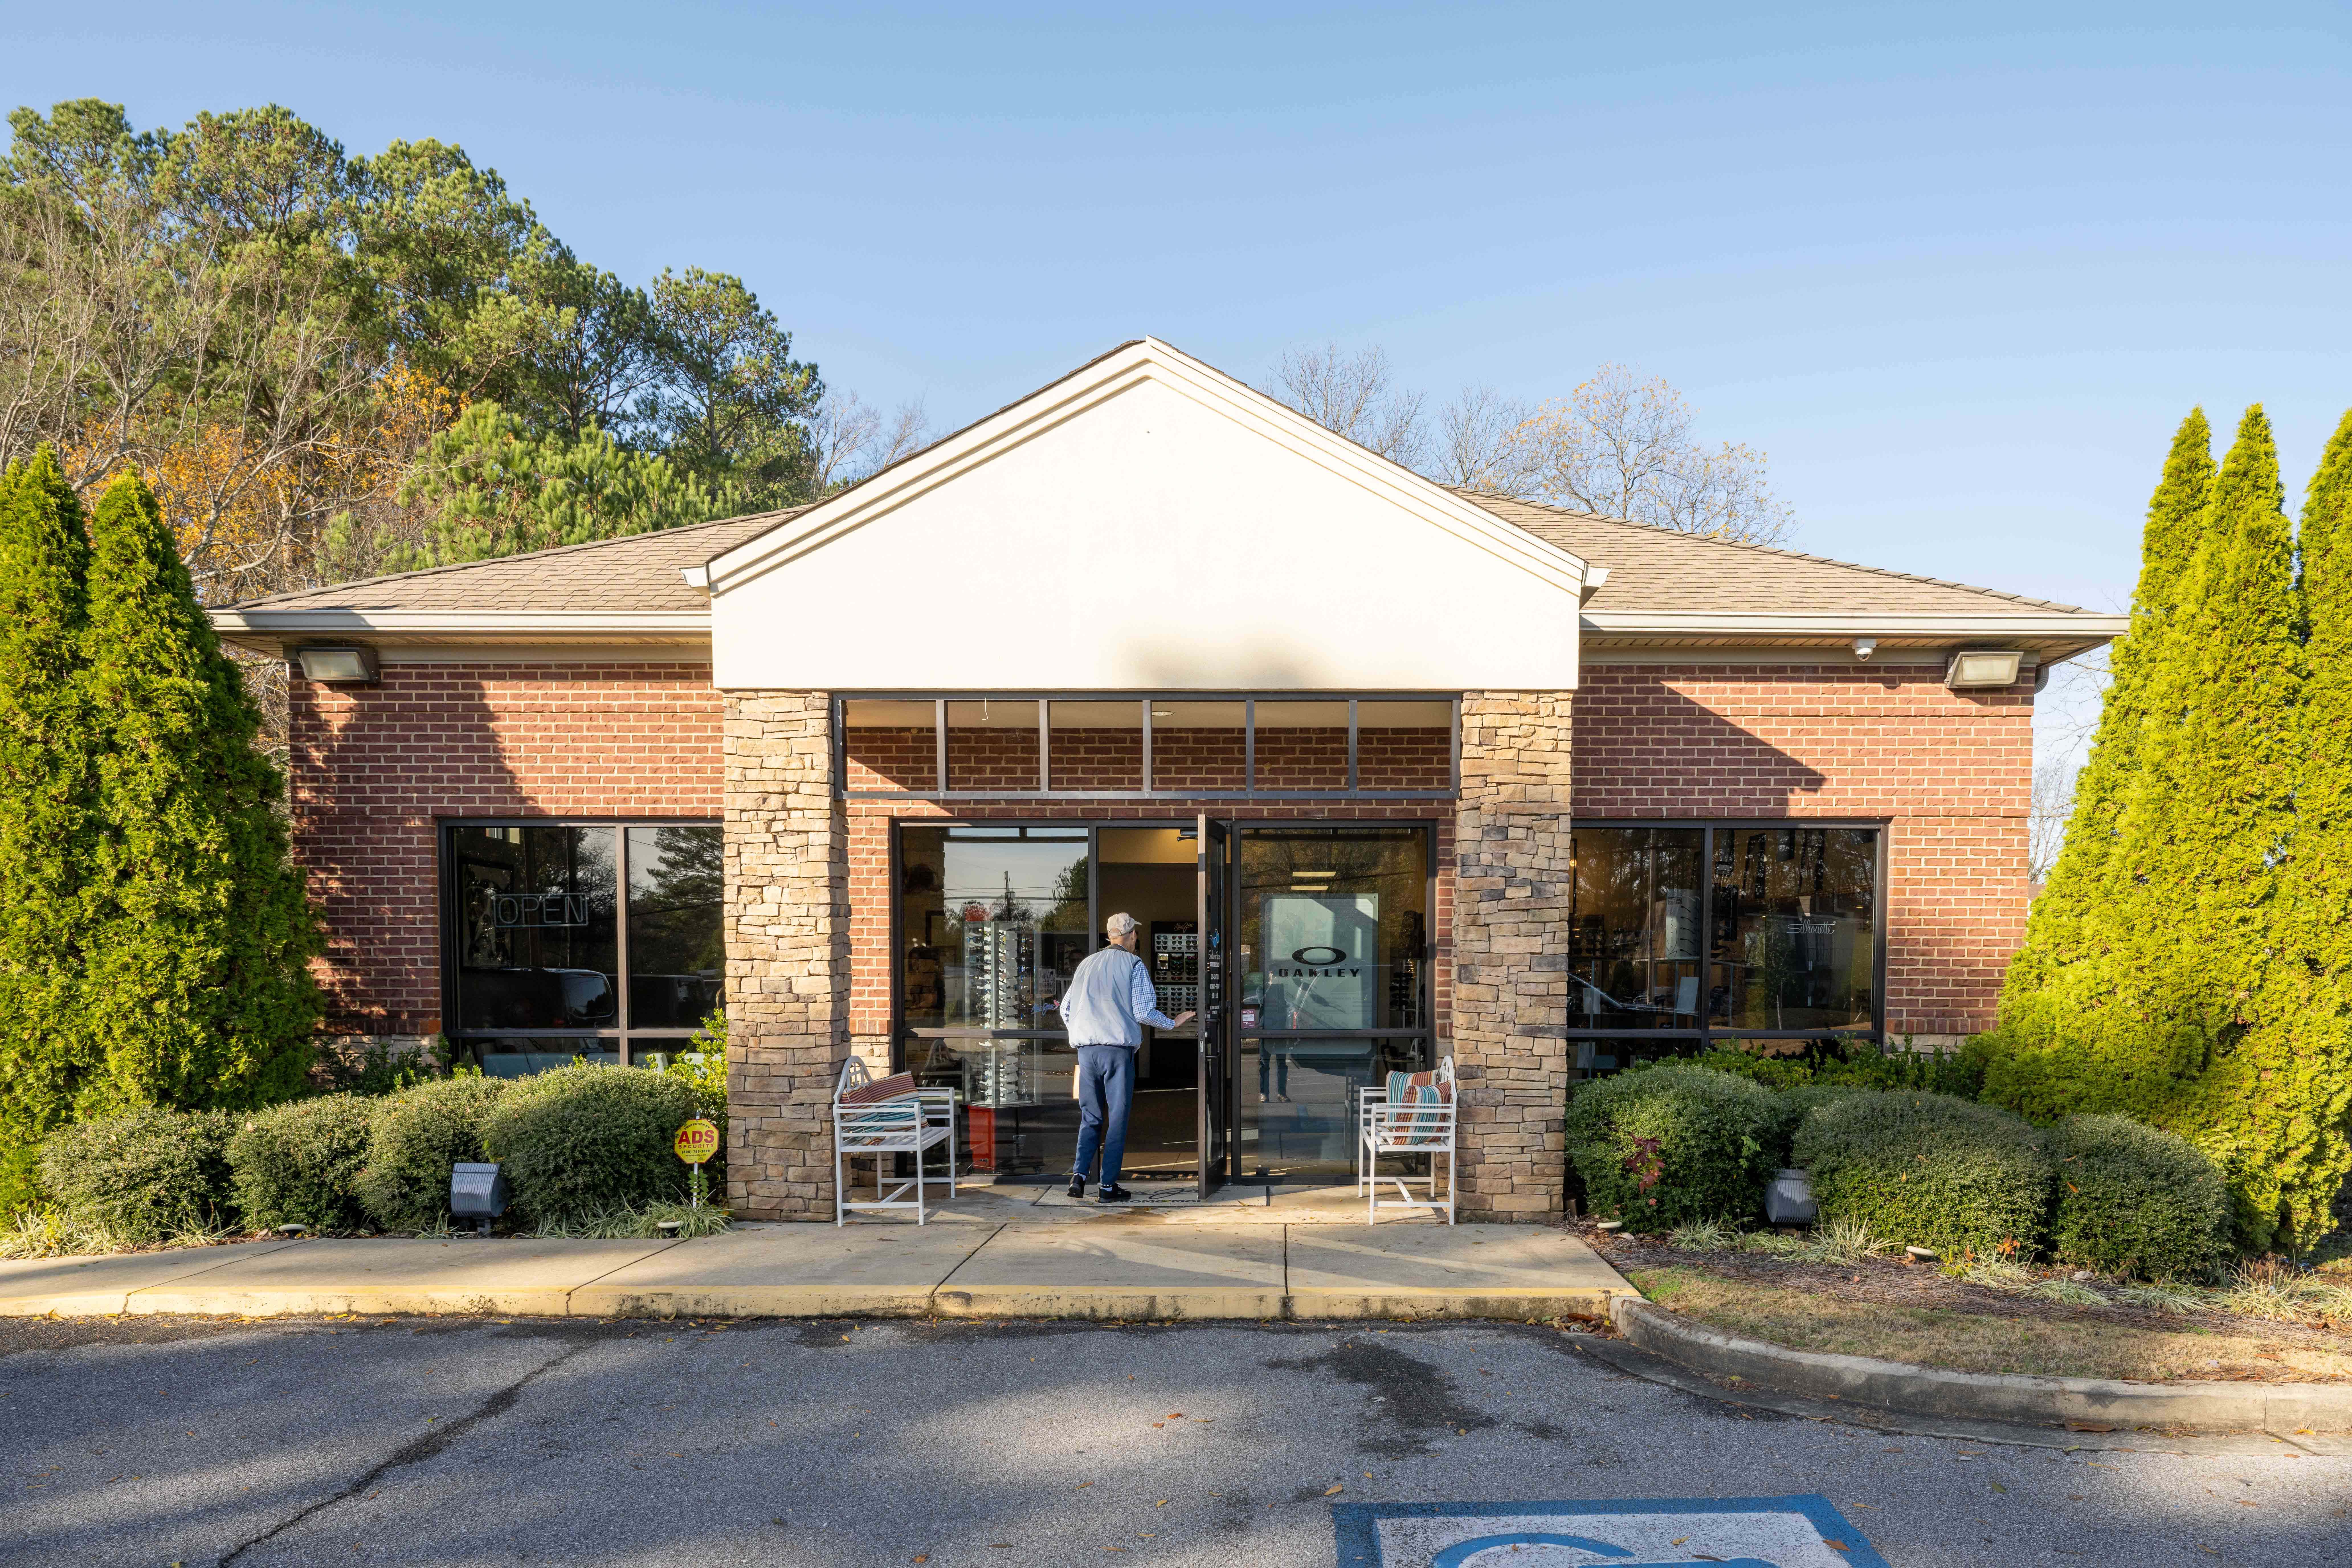 About Southern Focus Vision Center | Optometrist in Gardendale, AL